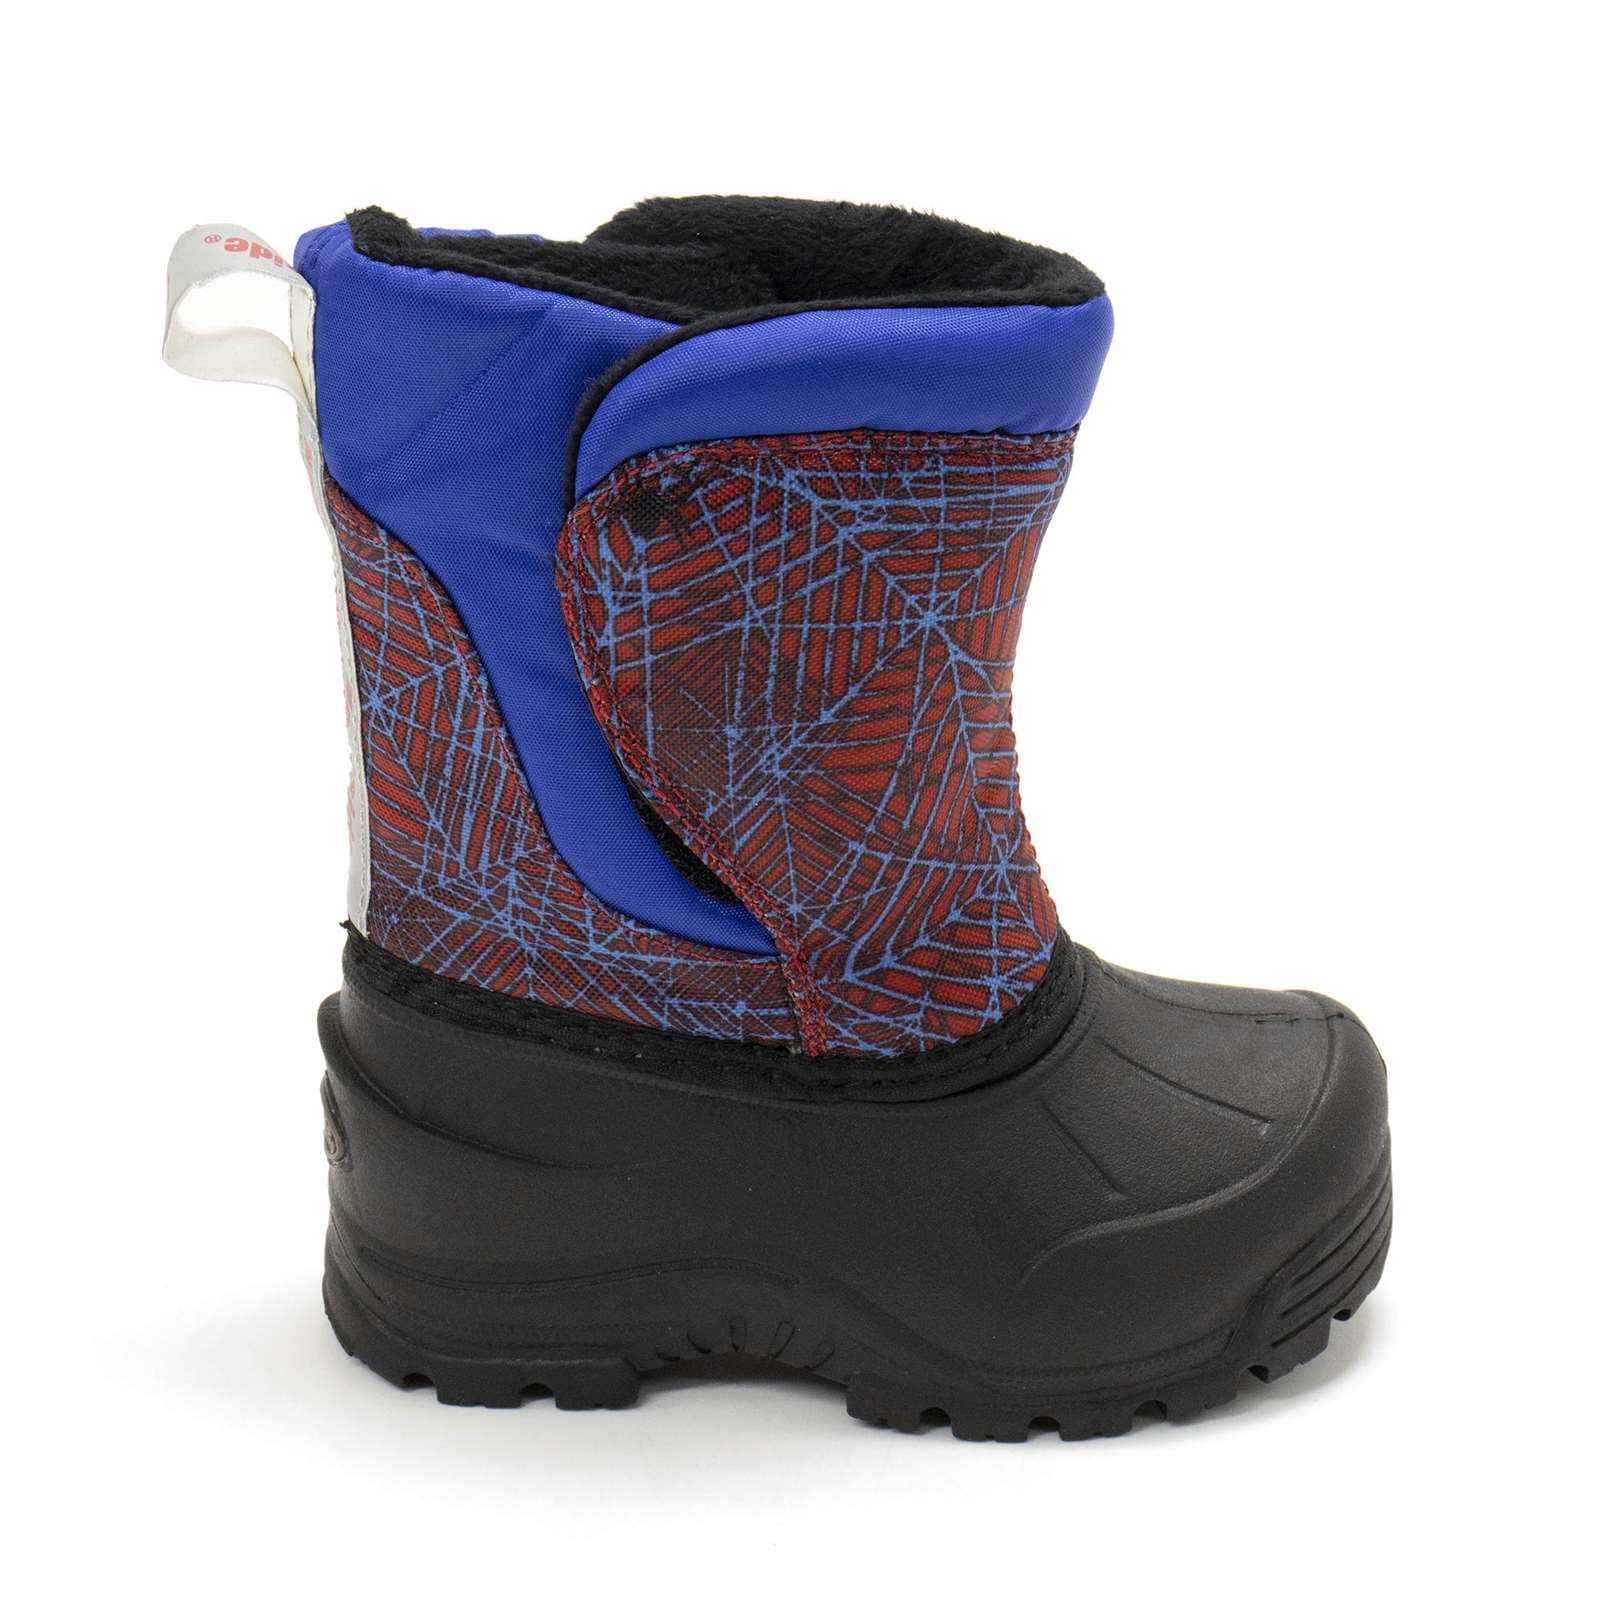 Northside Toddler Snoqualmie Winter Boots